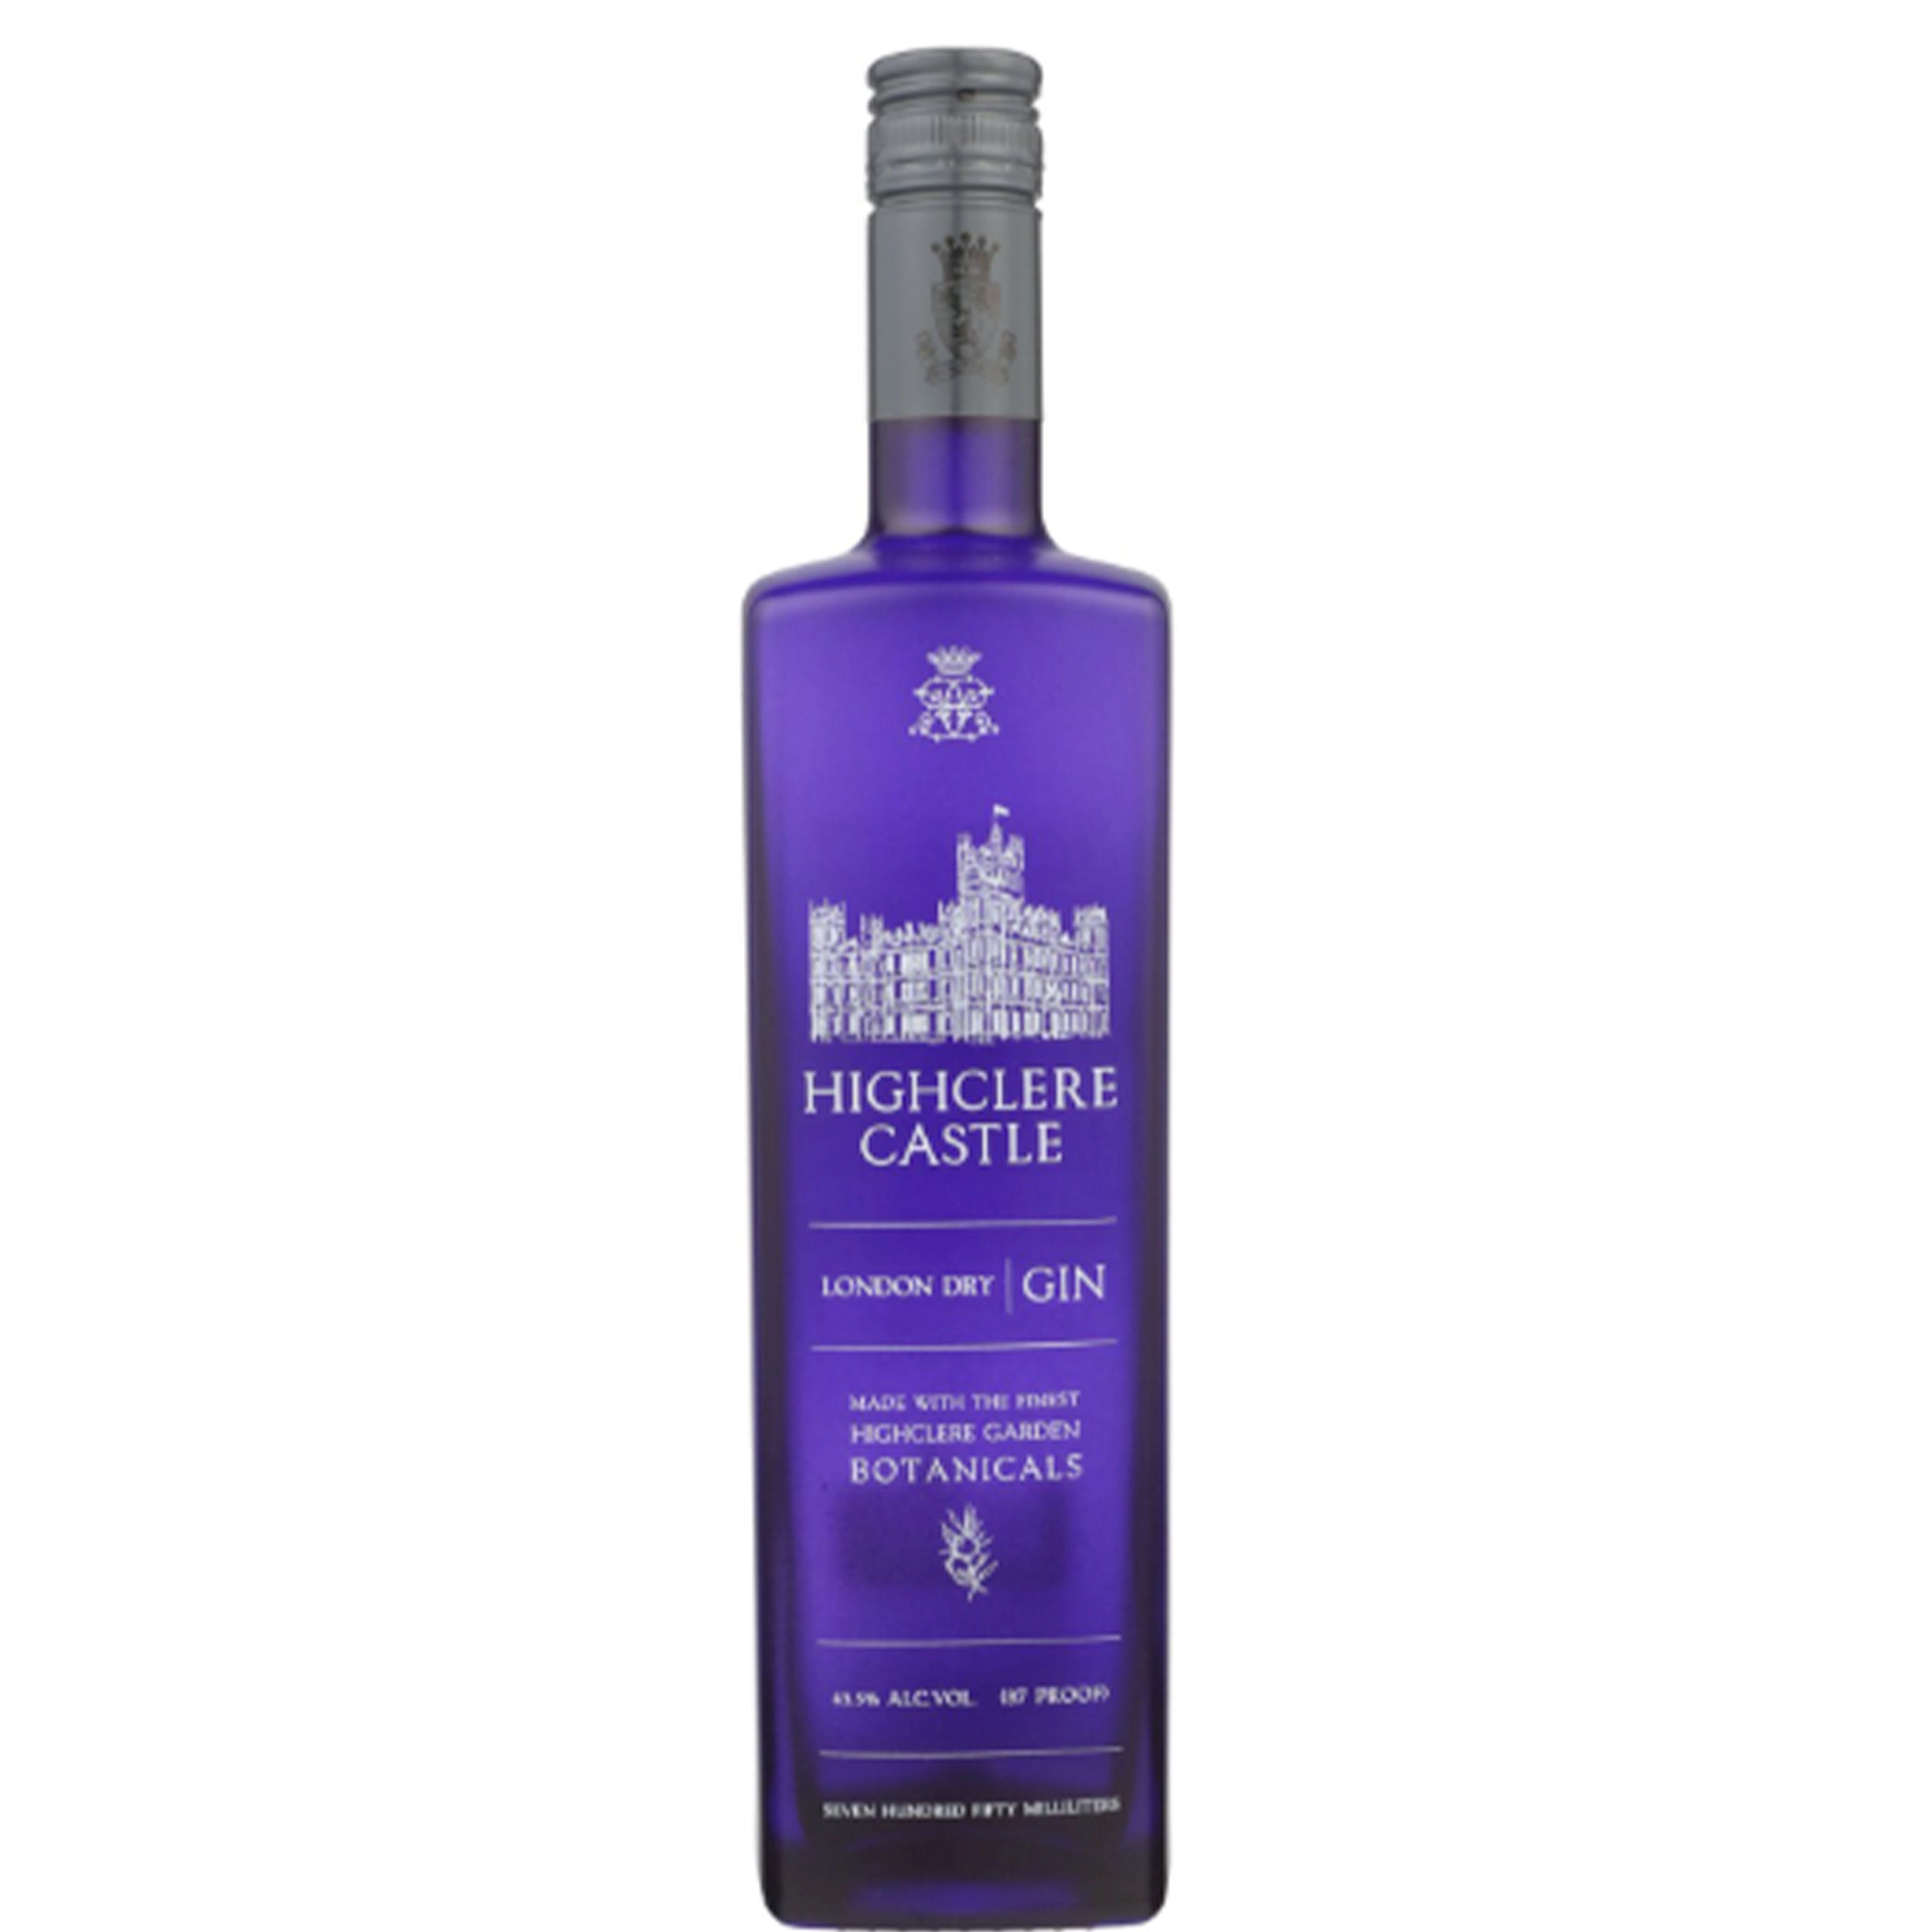 HIGHCLERE CASTLE LONDON DRY GIN